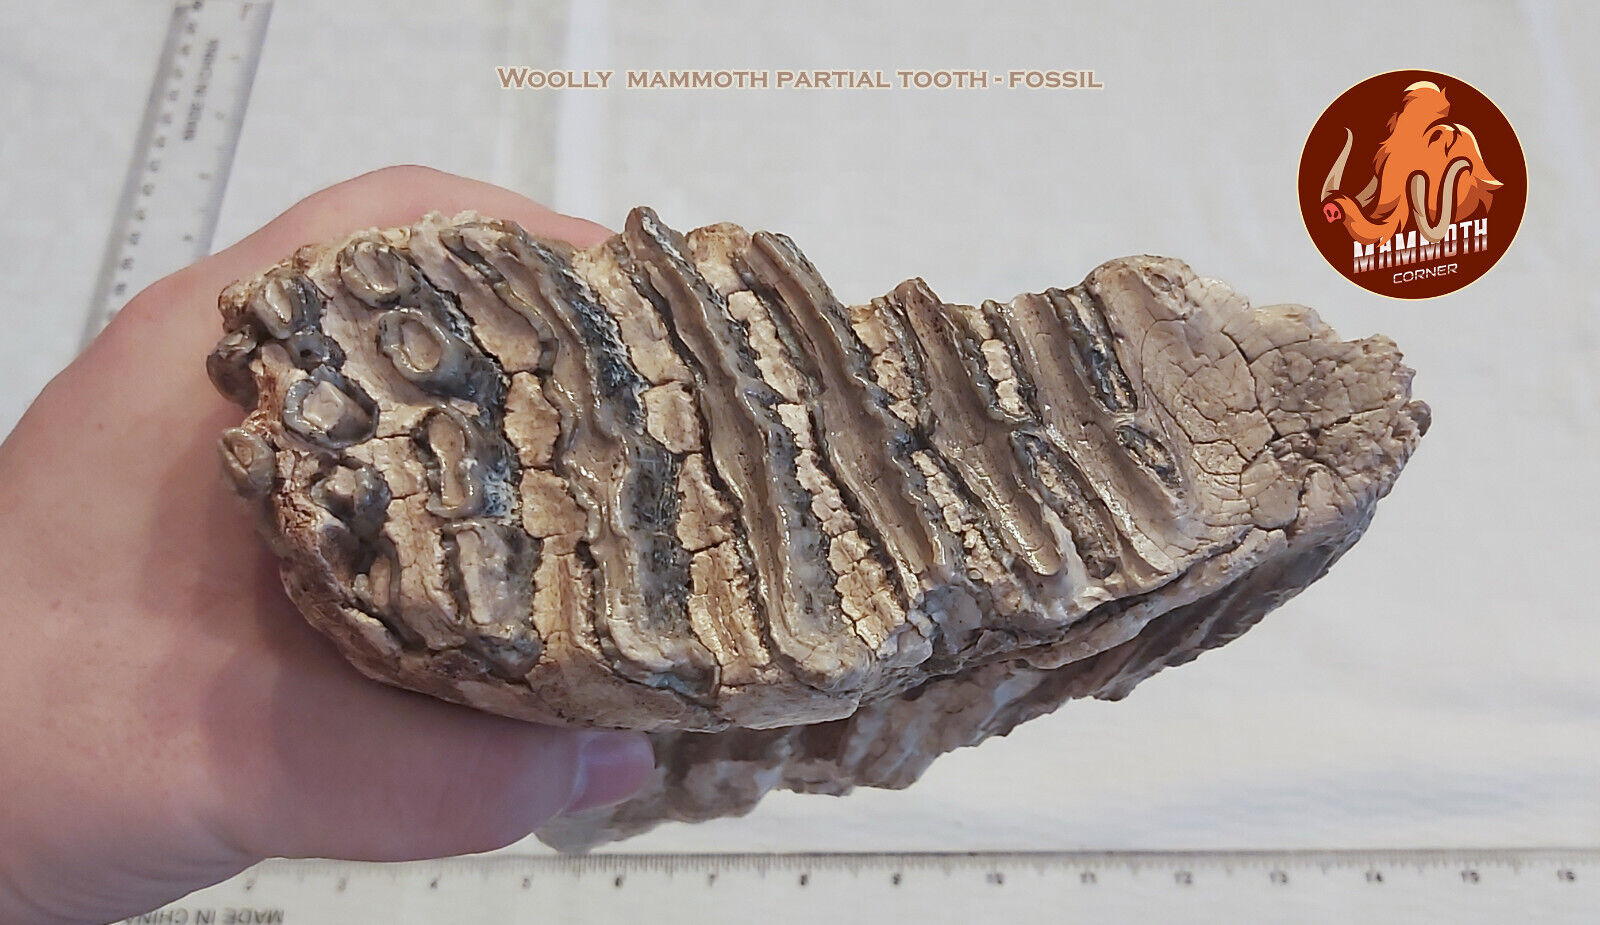 Woolly Mammoth Partial Tooth - Fossil